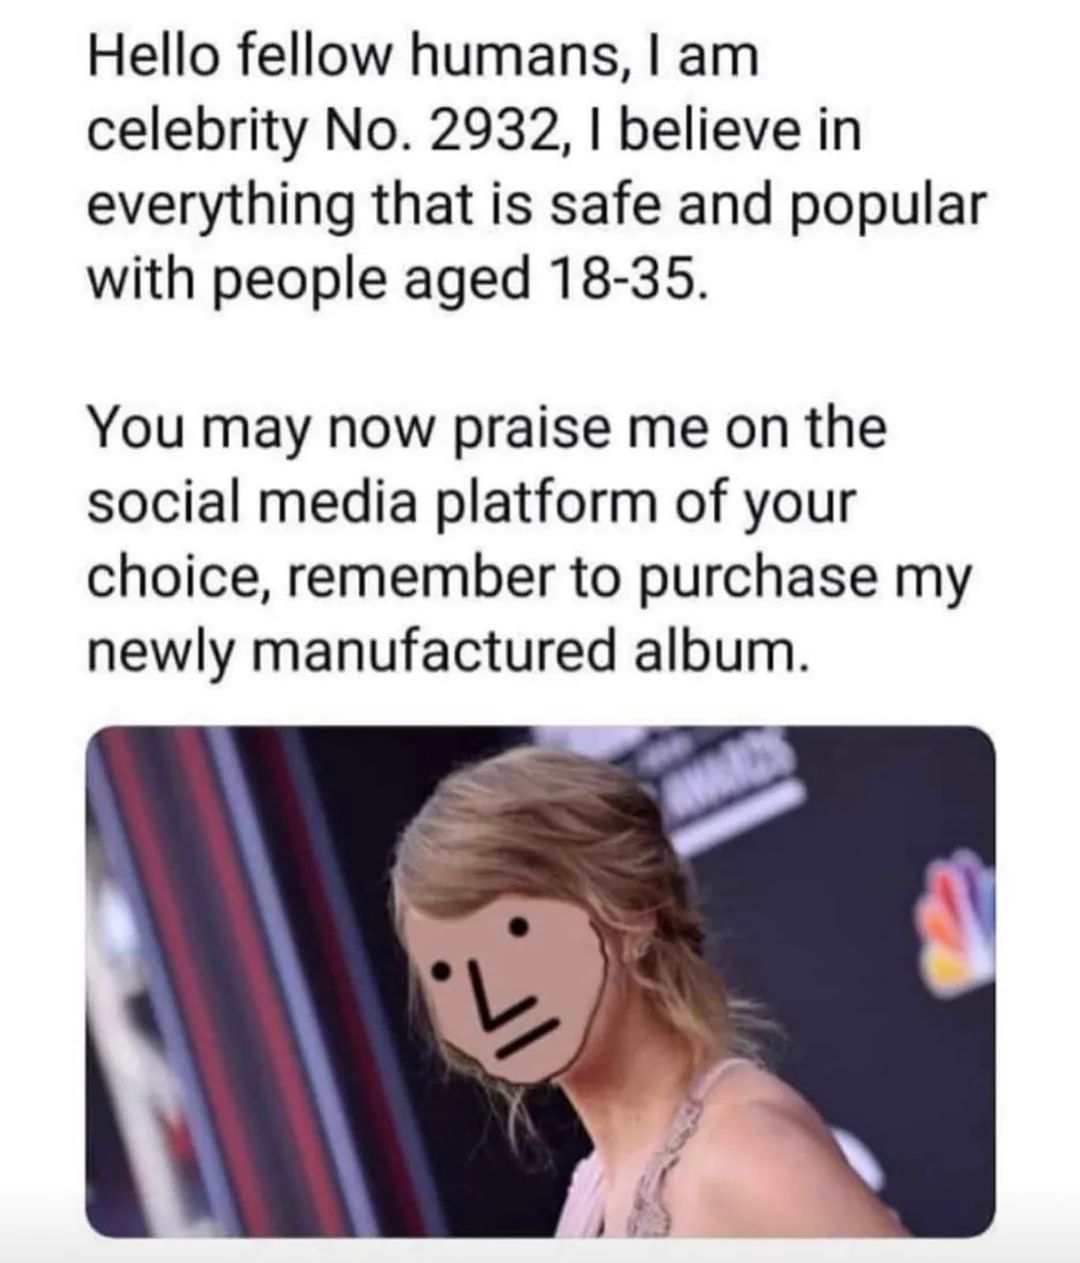 Hello fellow humans, I am
celebrity No. 2932, I believe in
everything that is safe and popular
with people aged 18-35.
You may now praise me on the
social media platform of your
choice, remember to purchase my
newly manufactured album.
L